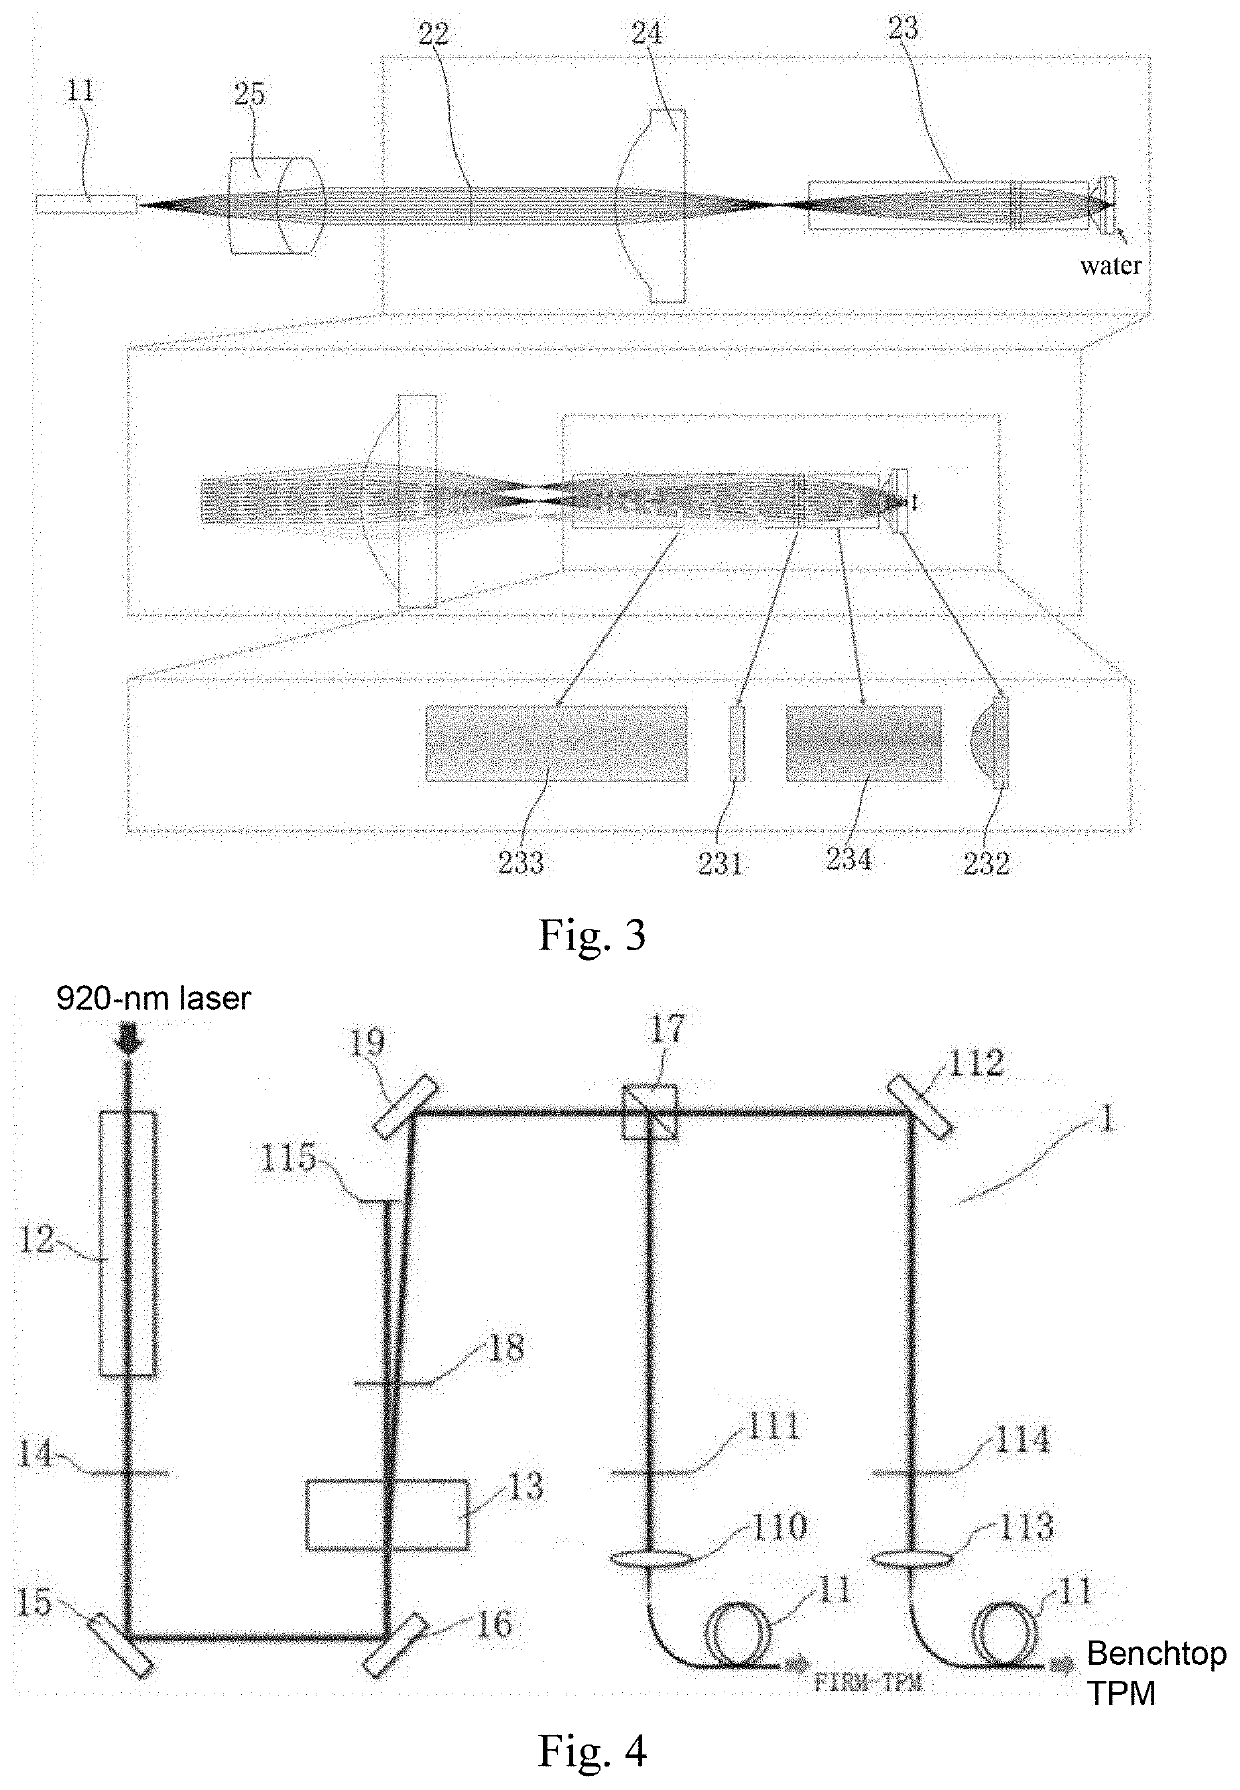 Femtosecond pulse laser modulator and miniature two-photon microscopic imaging device